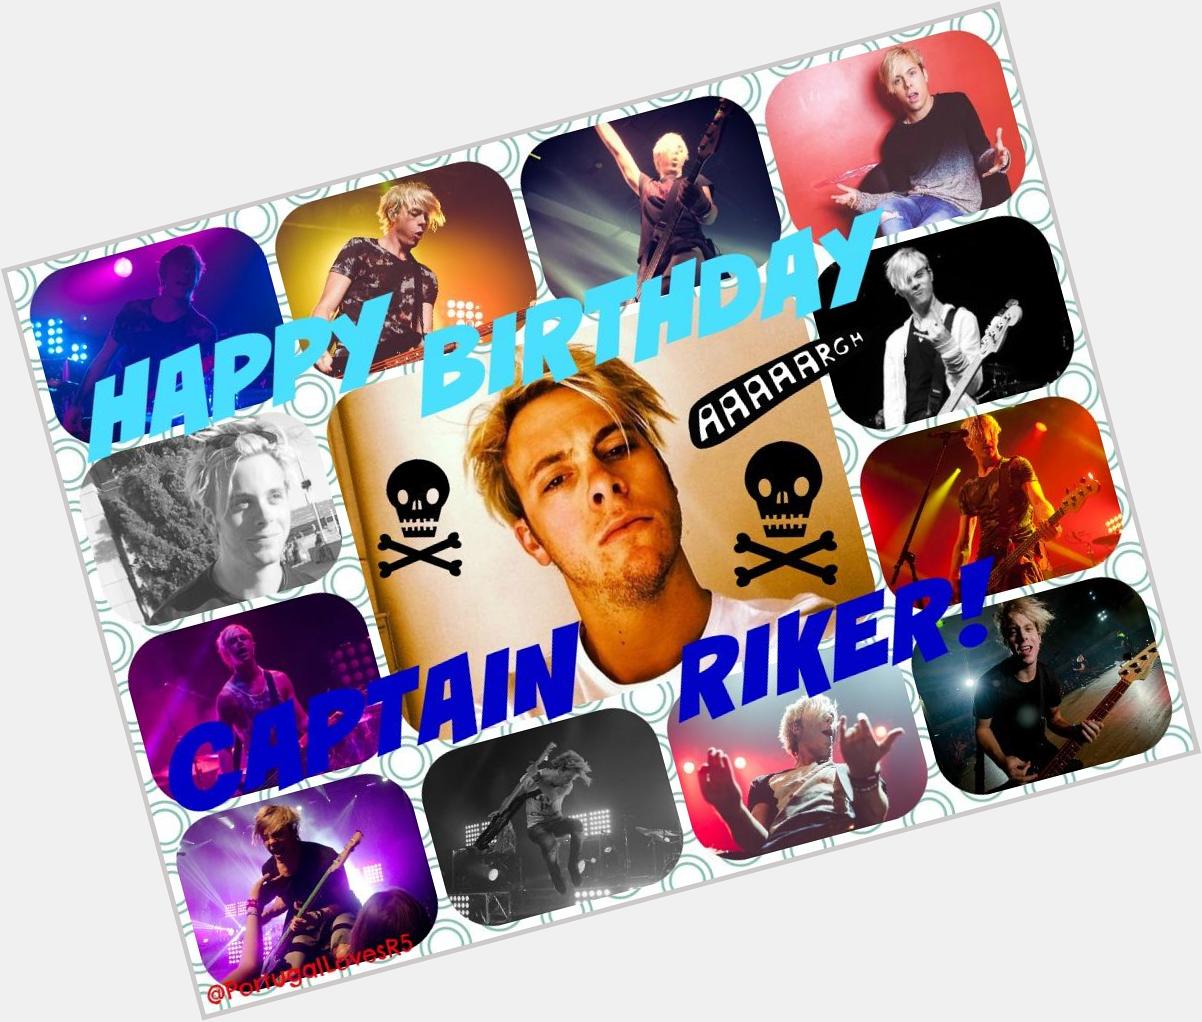 Happy birthday to the captain of the ship, Captain Riker Lynch! We love you!   